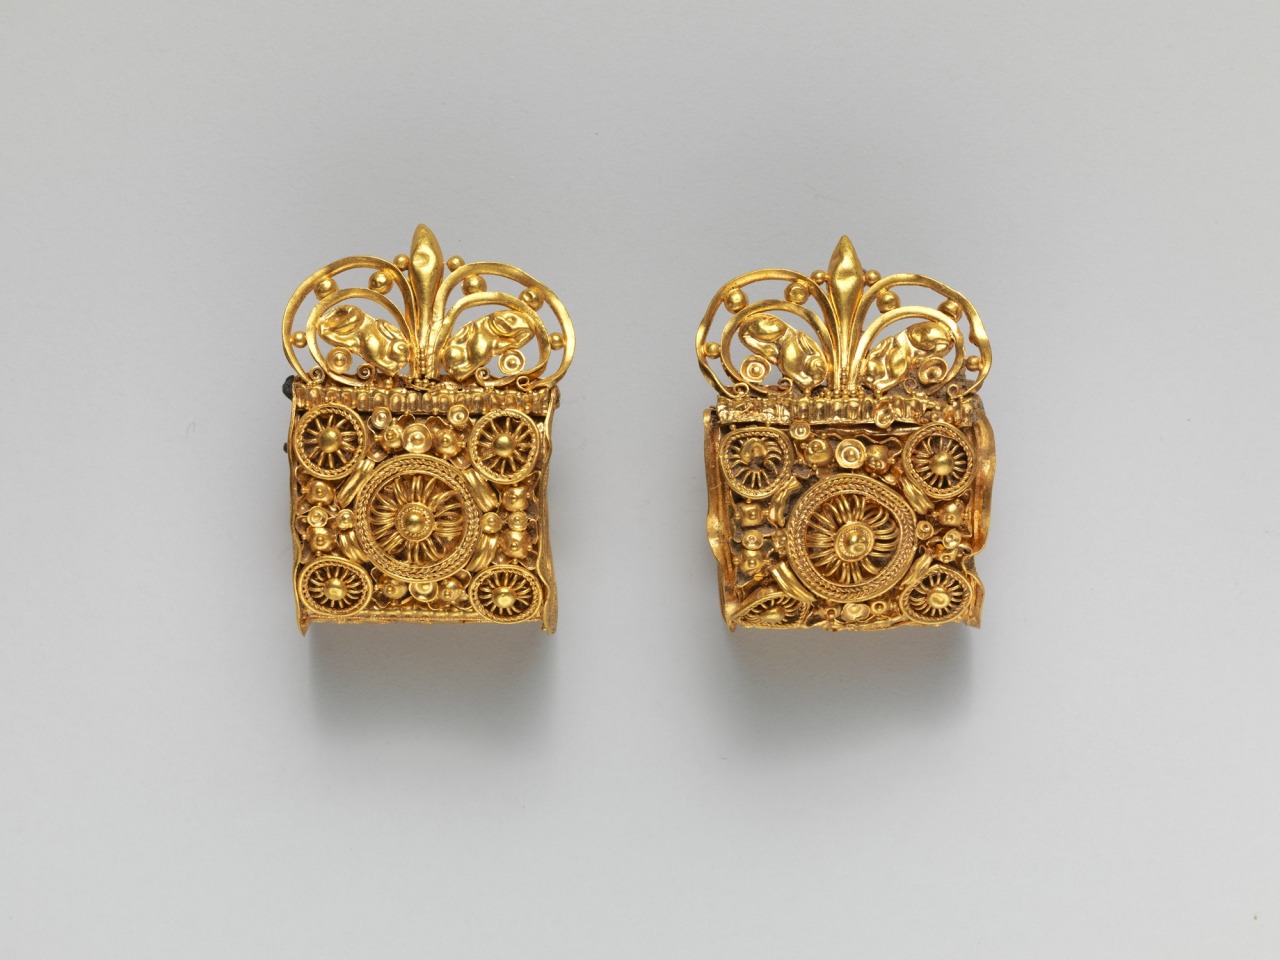 Etruscan Gold earrings, 6th century BC, from The Metropolitan Museum of Art.jpg